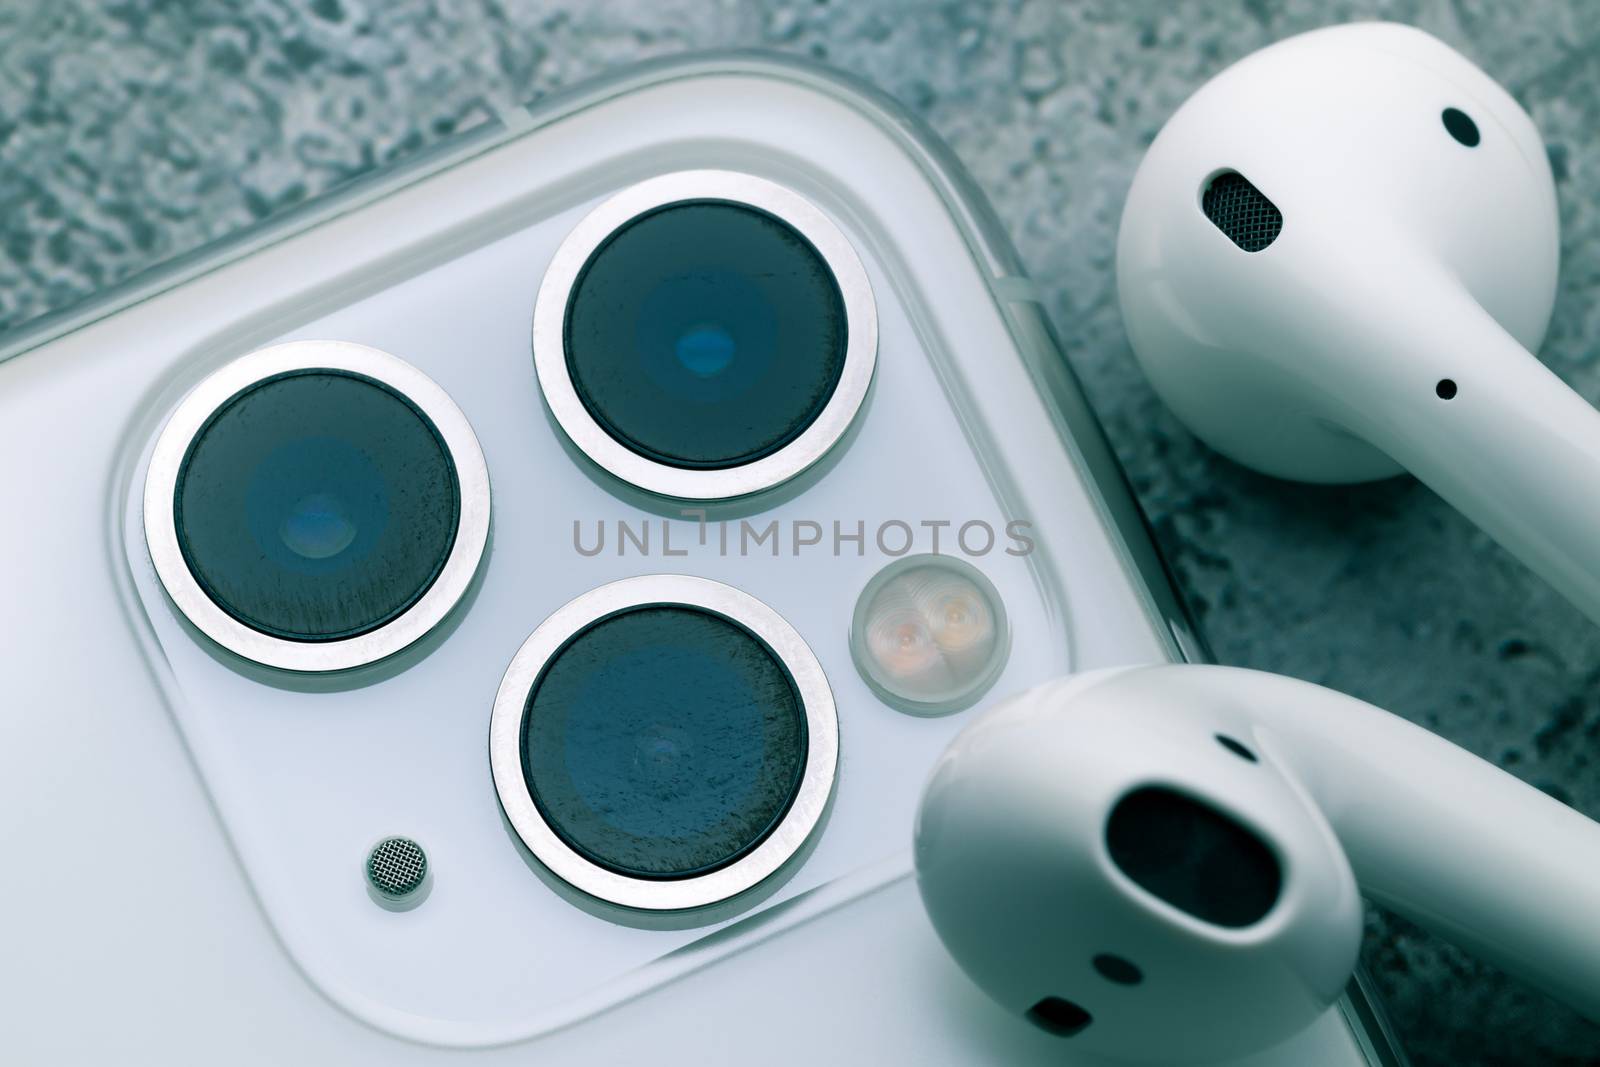 Close up shot for scratch on iPhone11 Pro Max rear camera lens, the triple camera system of ultra wide, wide and telephoto lenses. iPhone11 Pro Max and Airpods